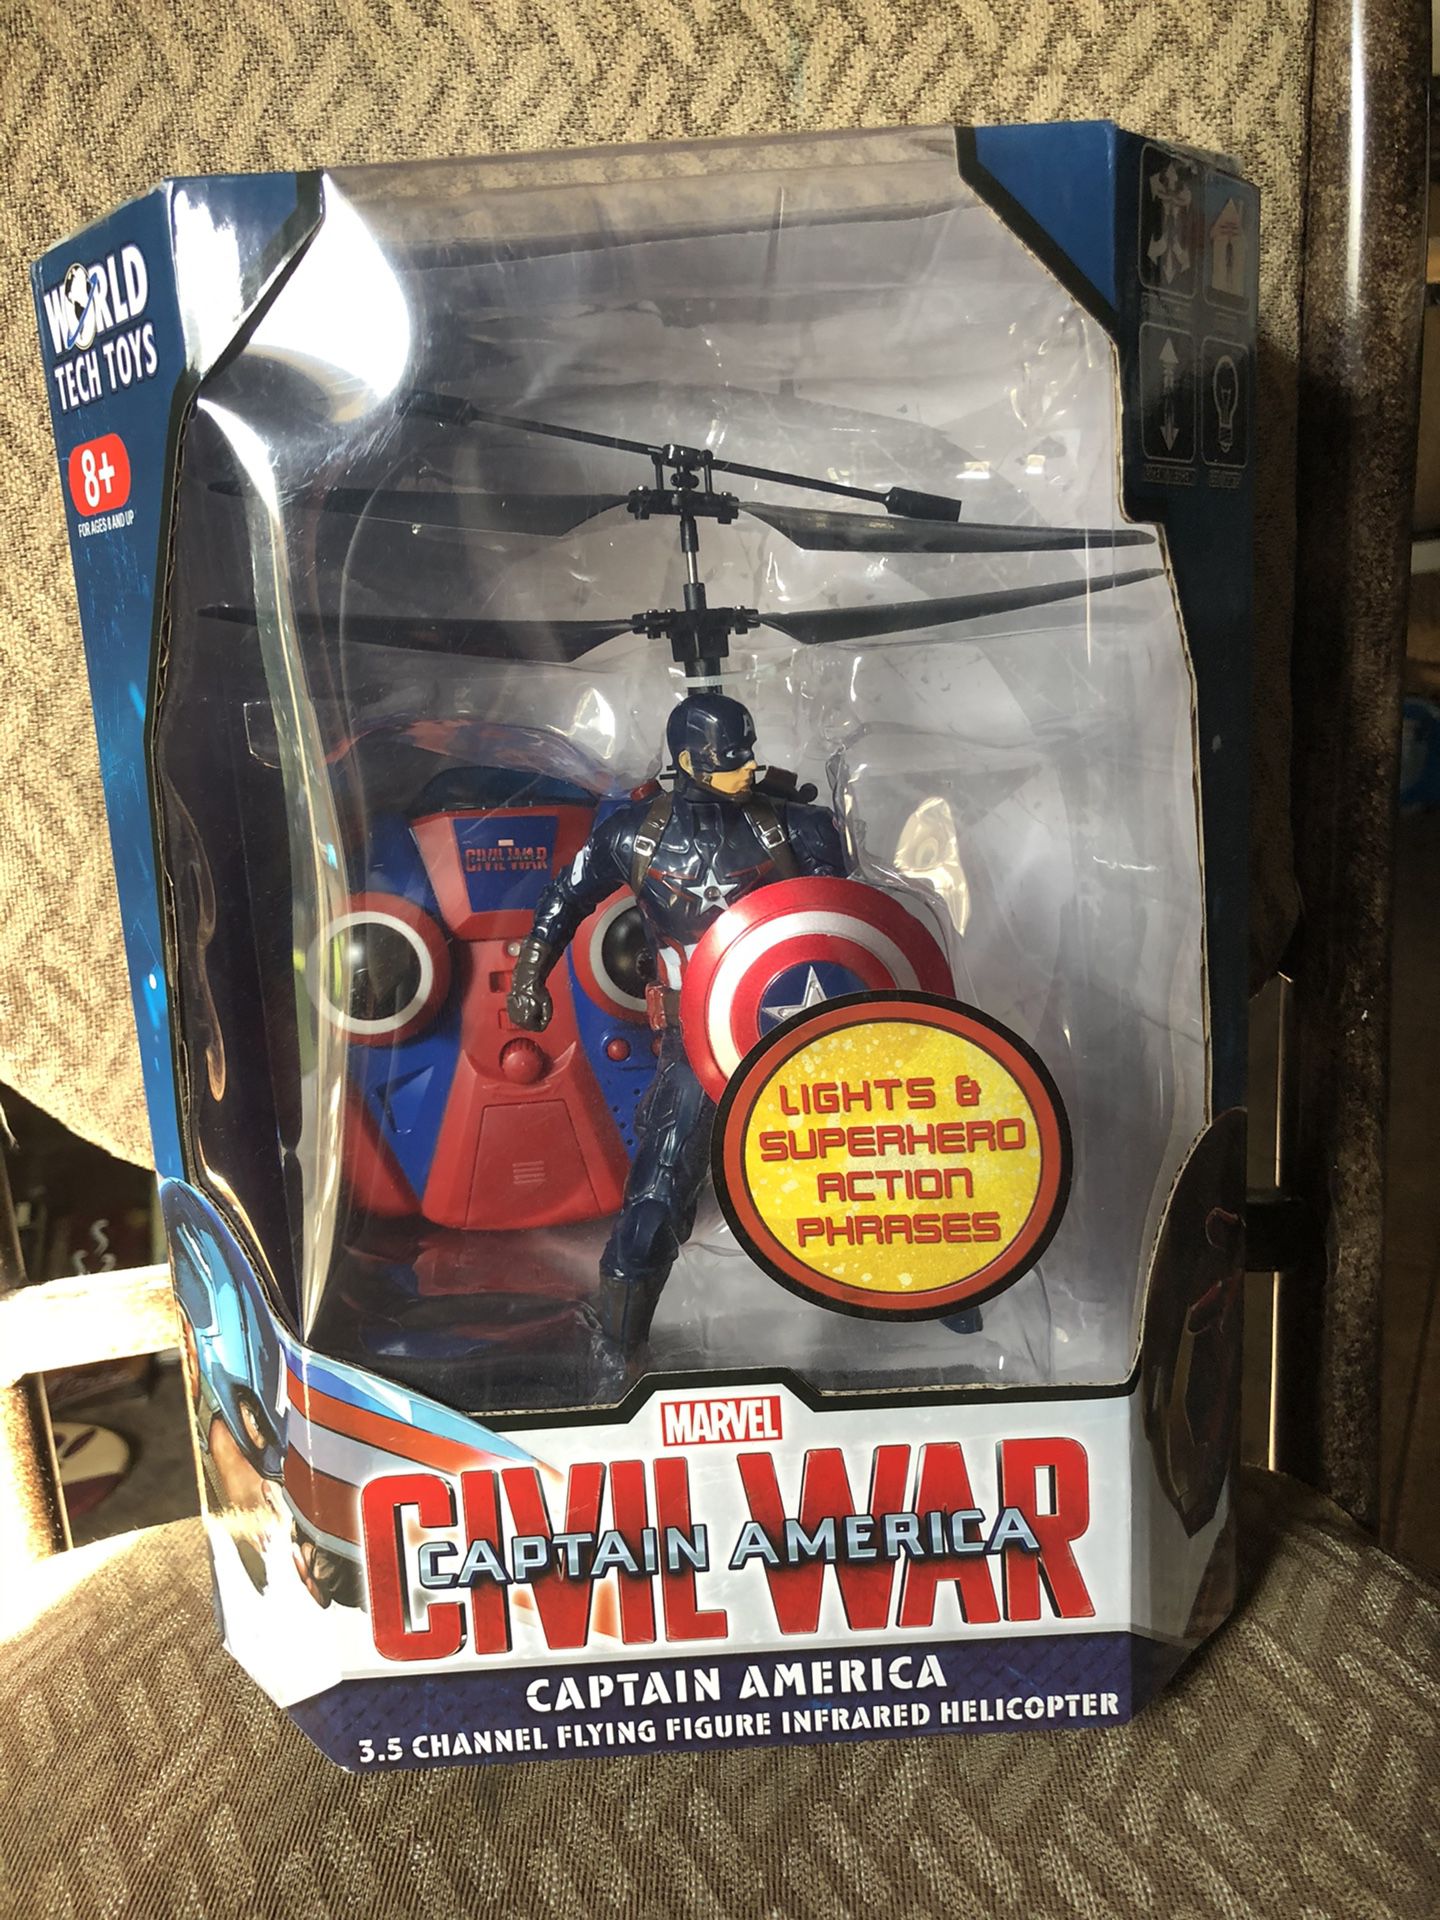 Captain America flying toy